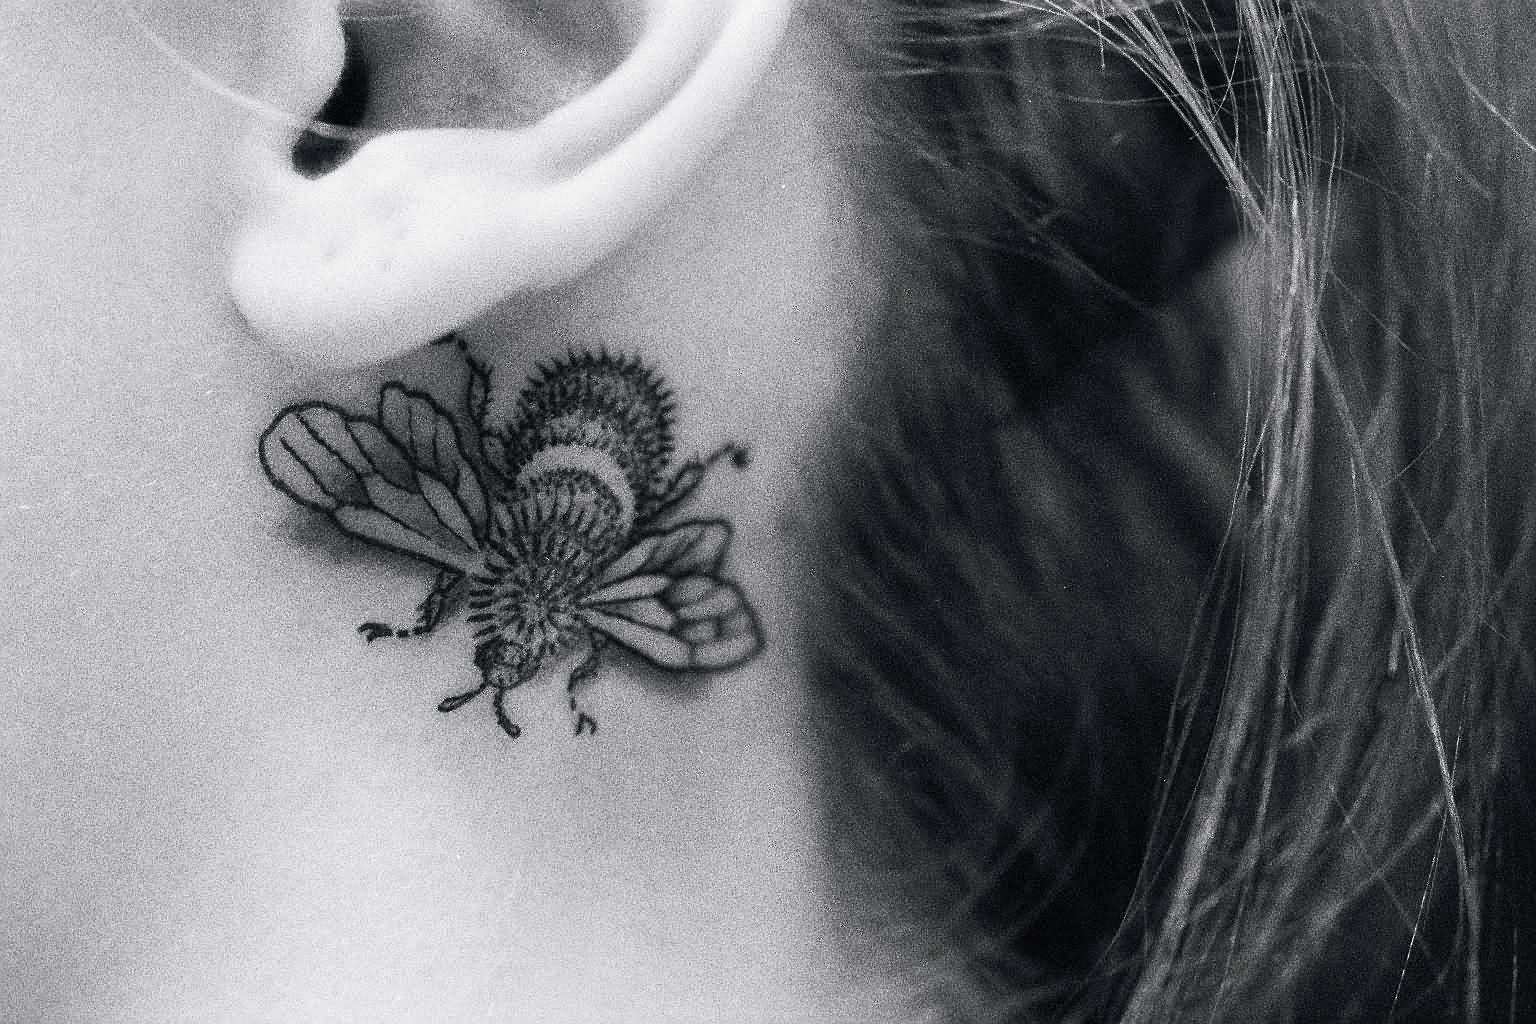 Black And White Bumblebee Tattoo On Left Behind The Ear